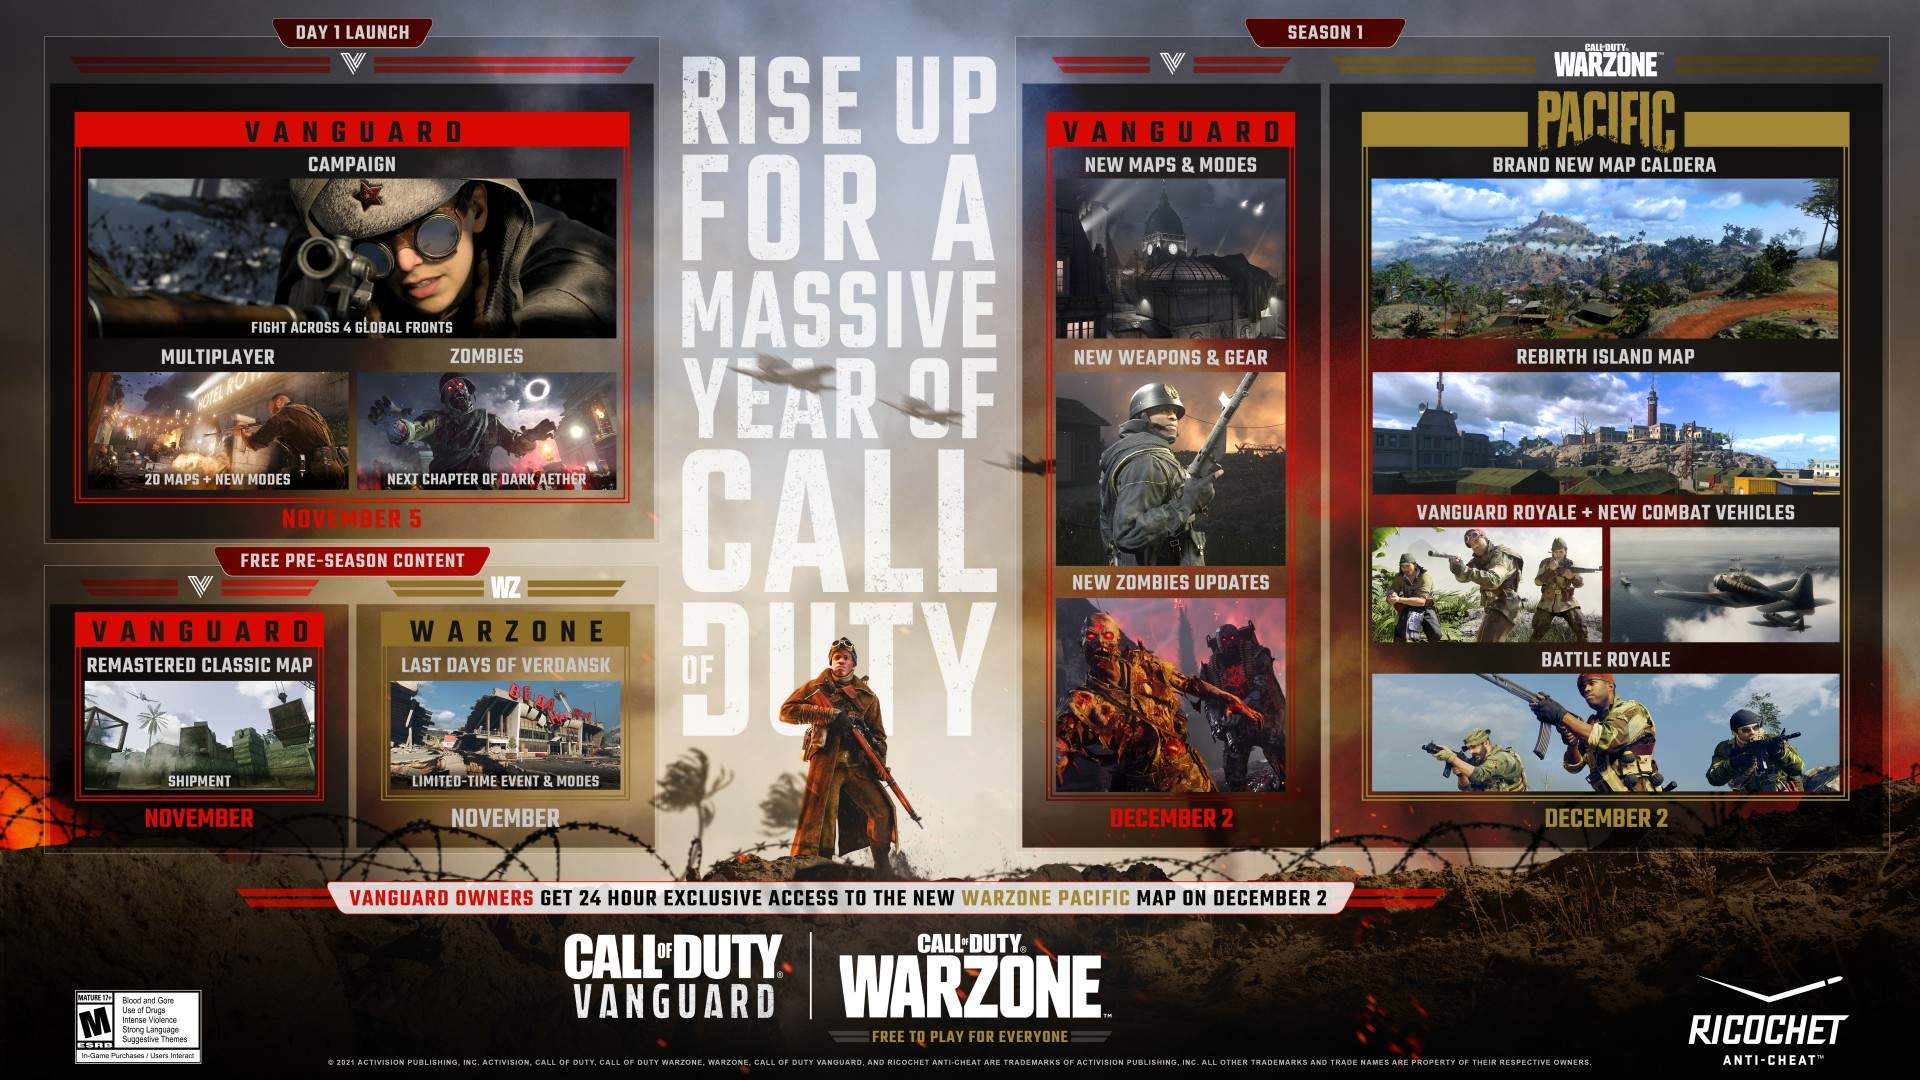 Call of Duty: Vanguard Launch and the Road to Season One